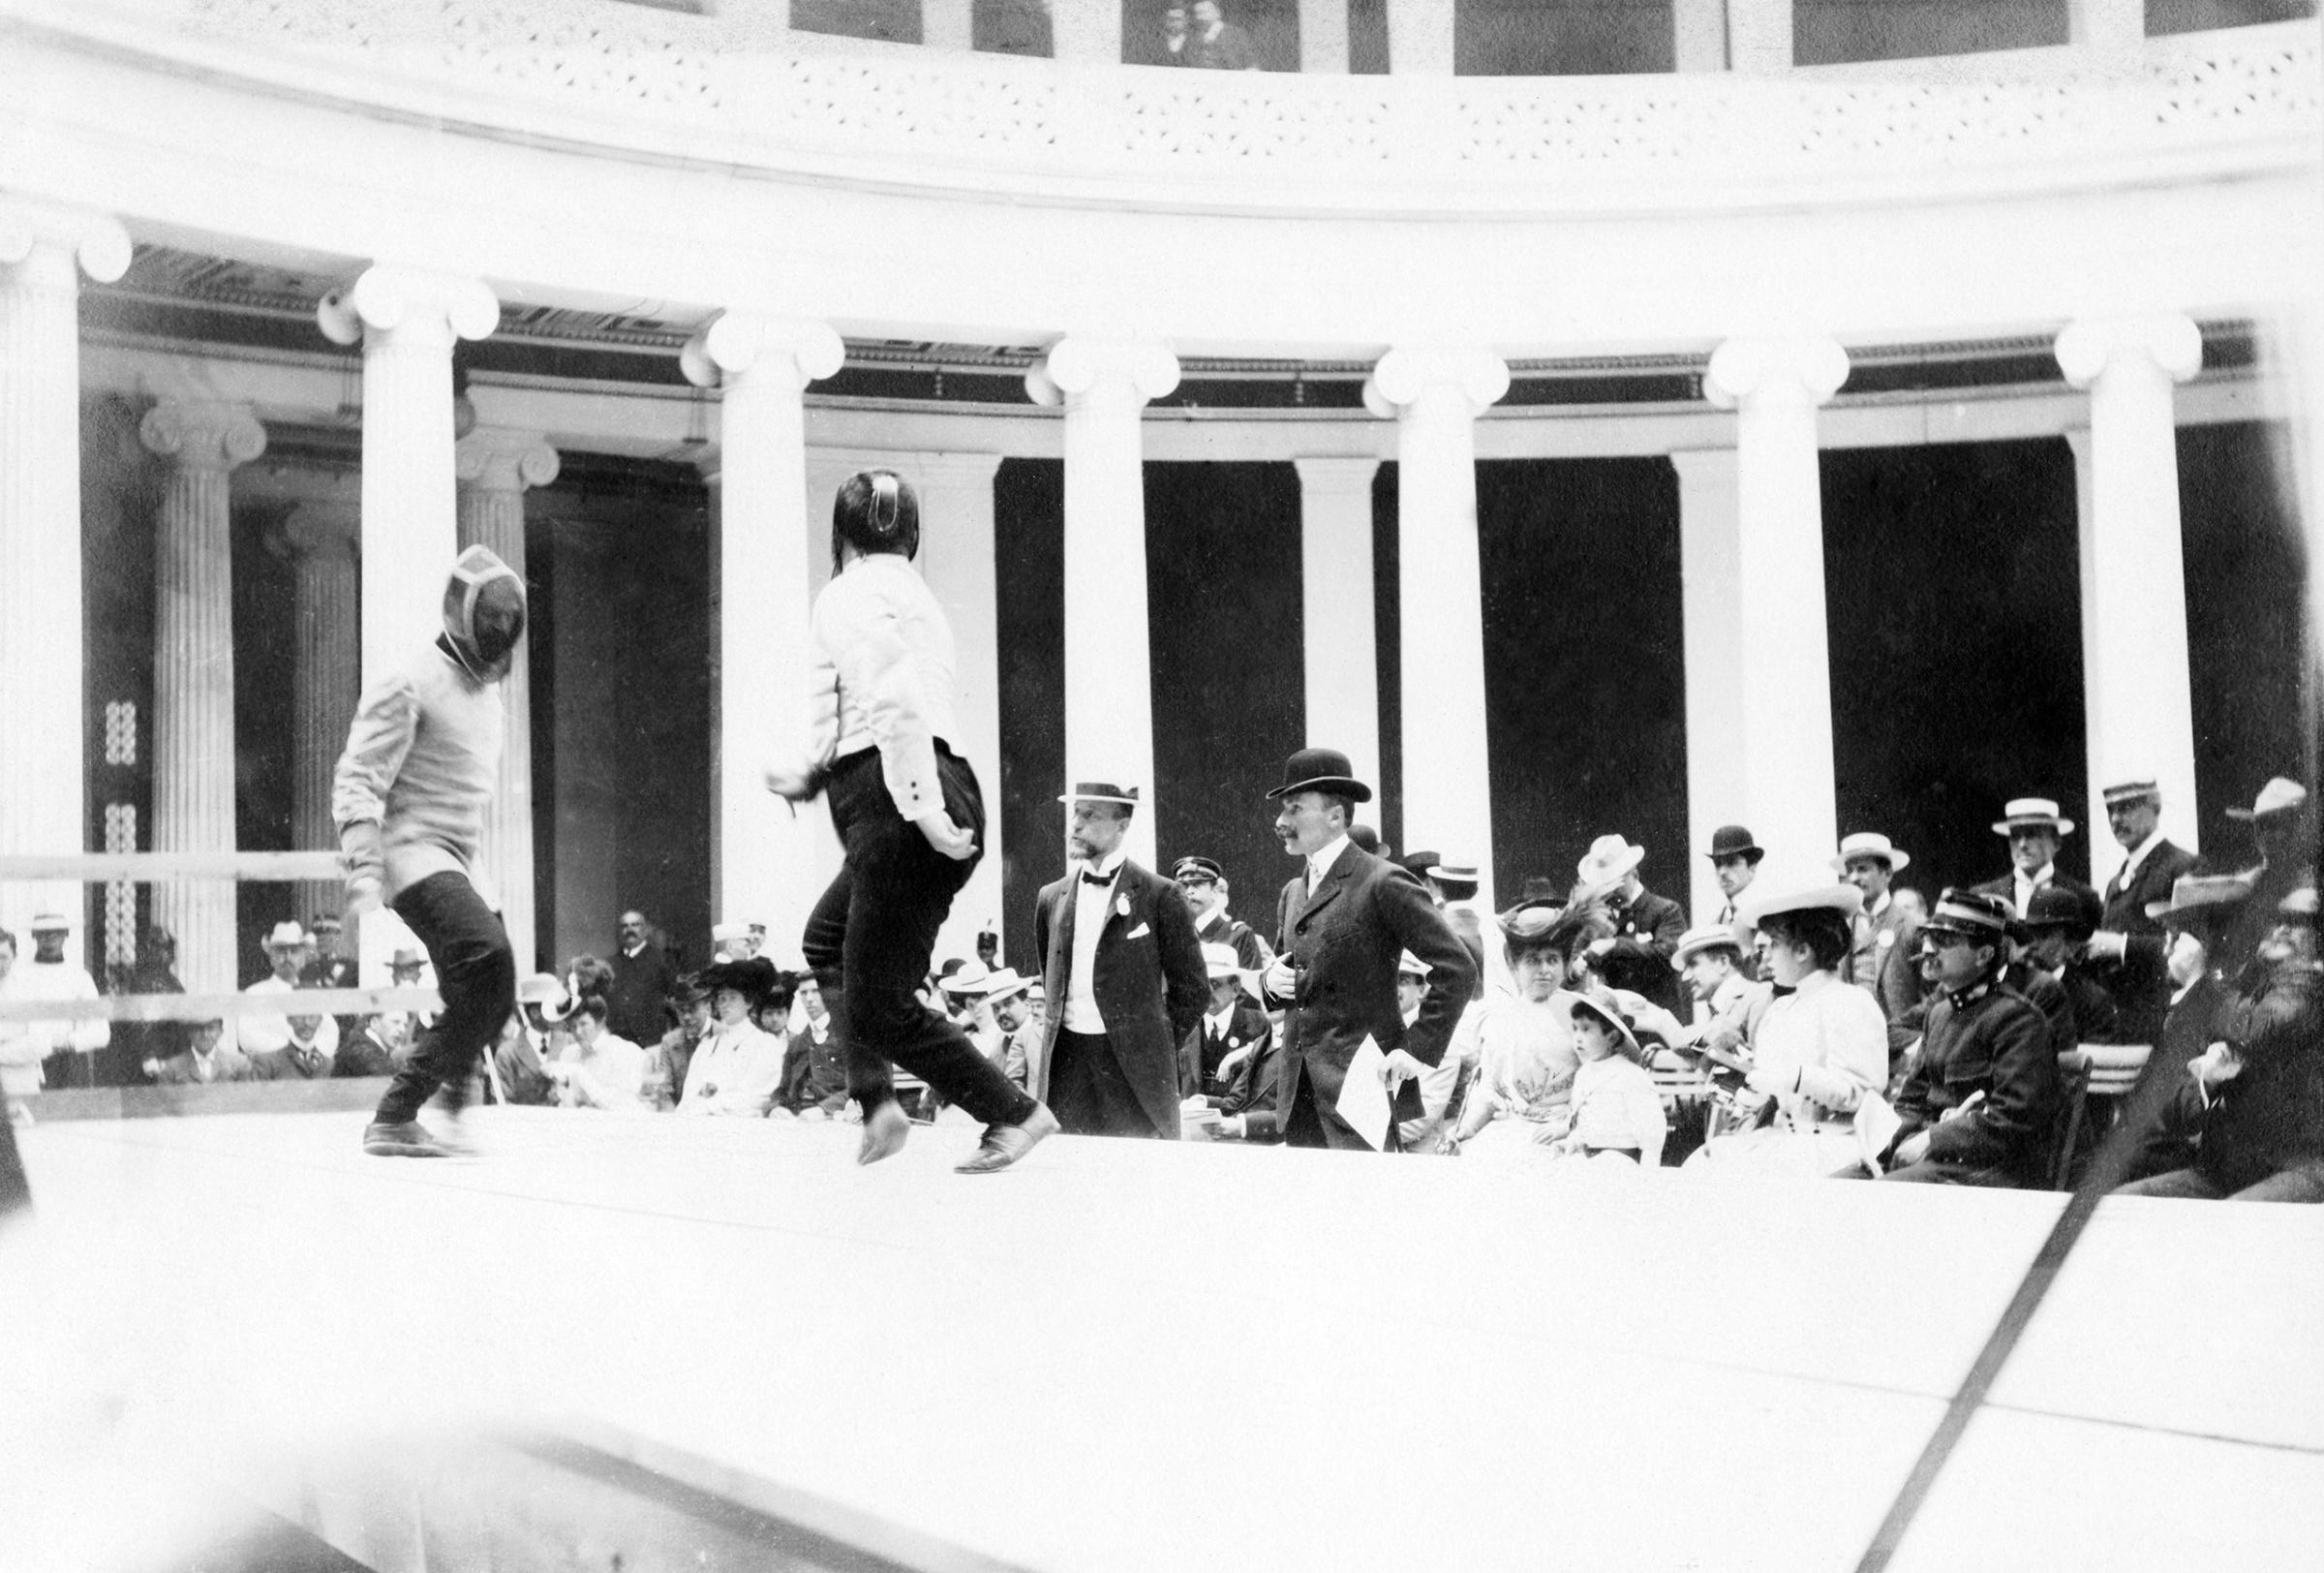 A fencing match in the Zapeion Hall at the Olympic Games in Athens, Greece in 1896.